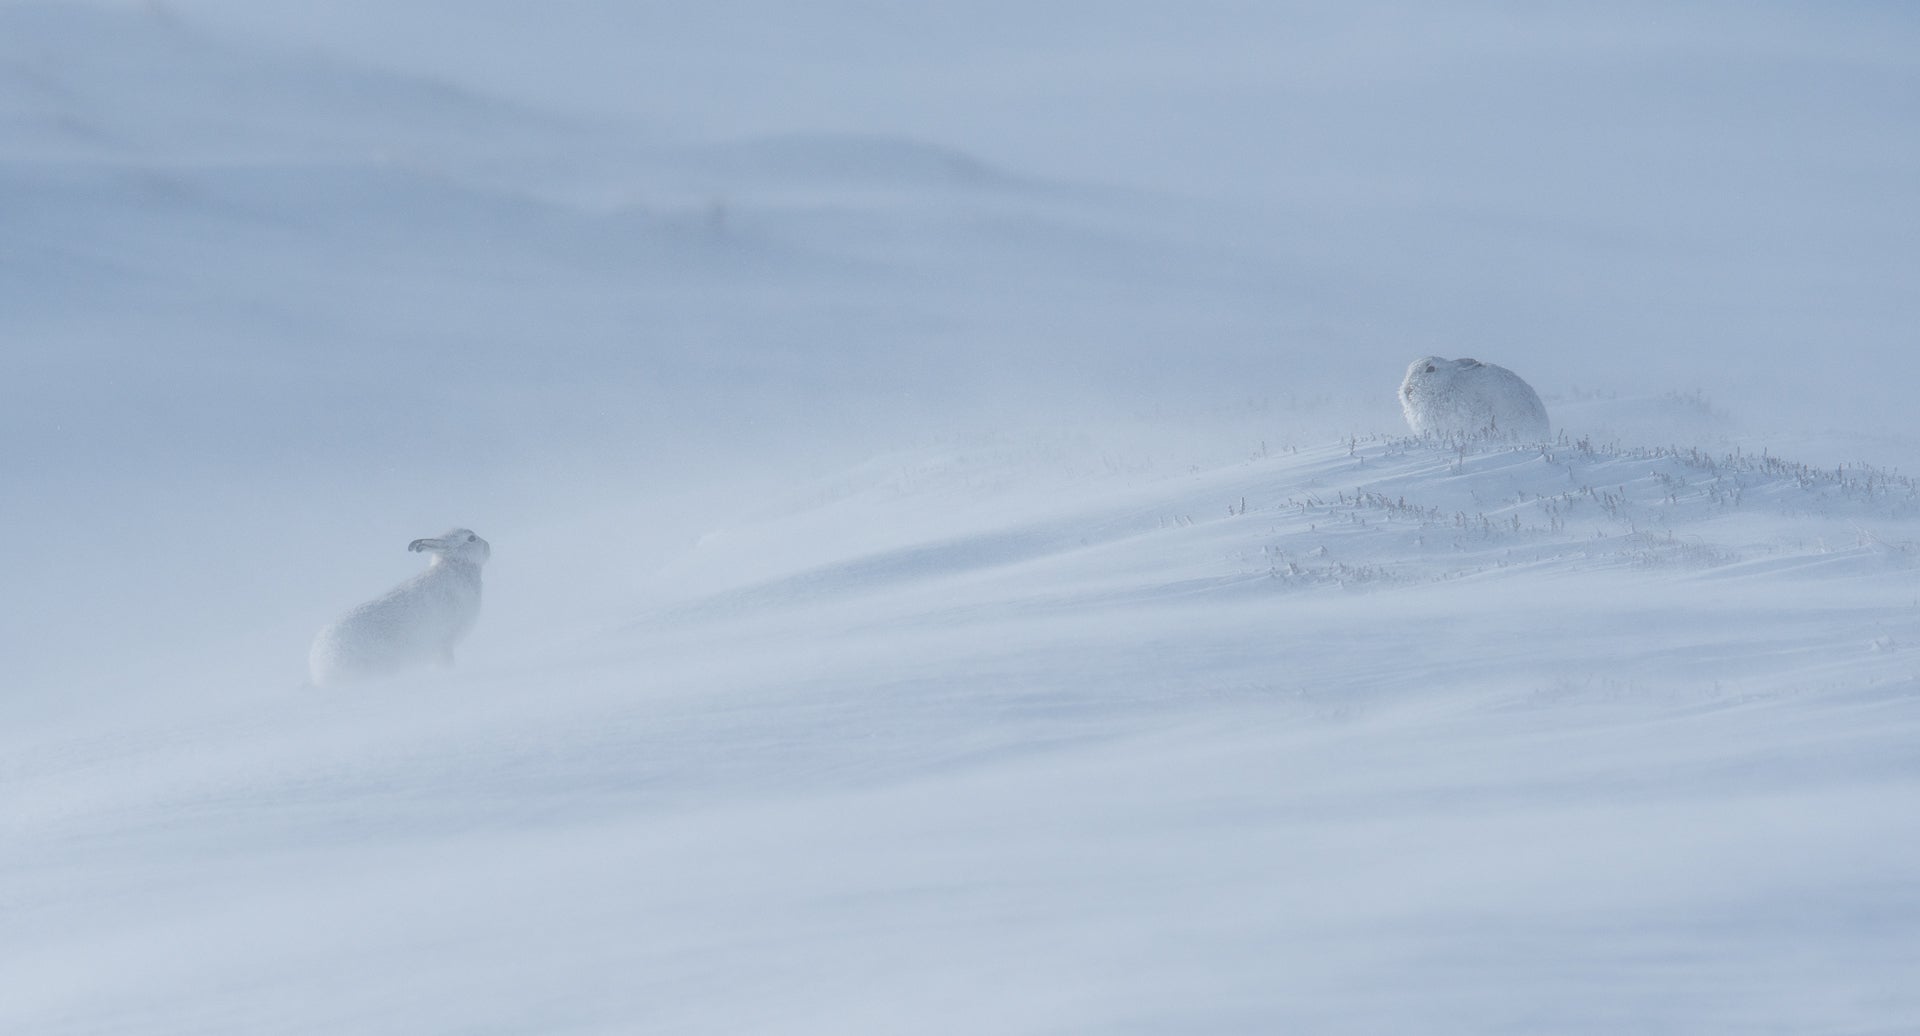 Two hares in the frigid landscape of Cairngorms, Scotland. (Photo: Peter Bartholomew)